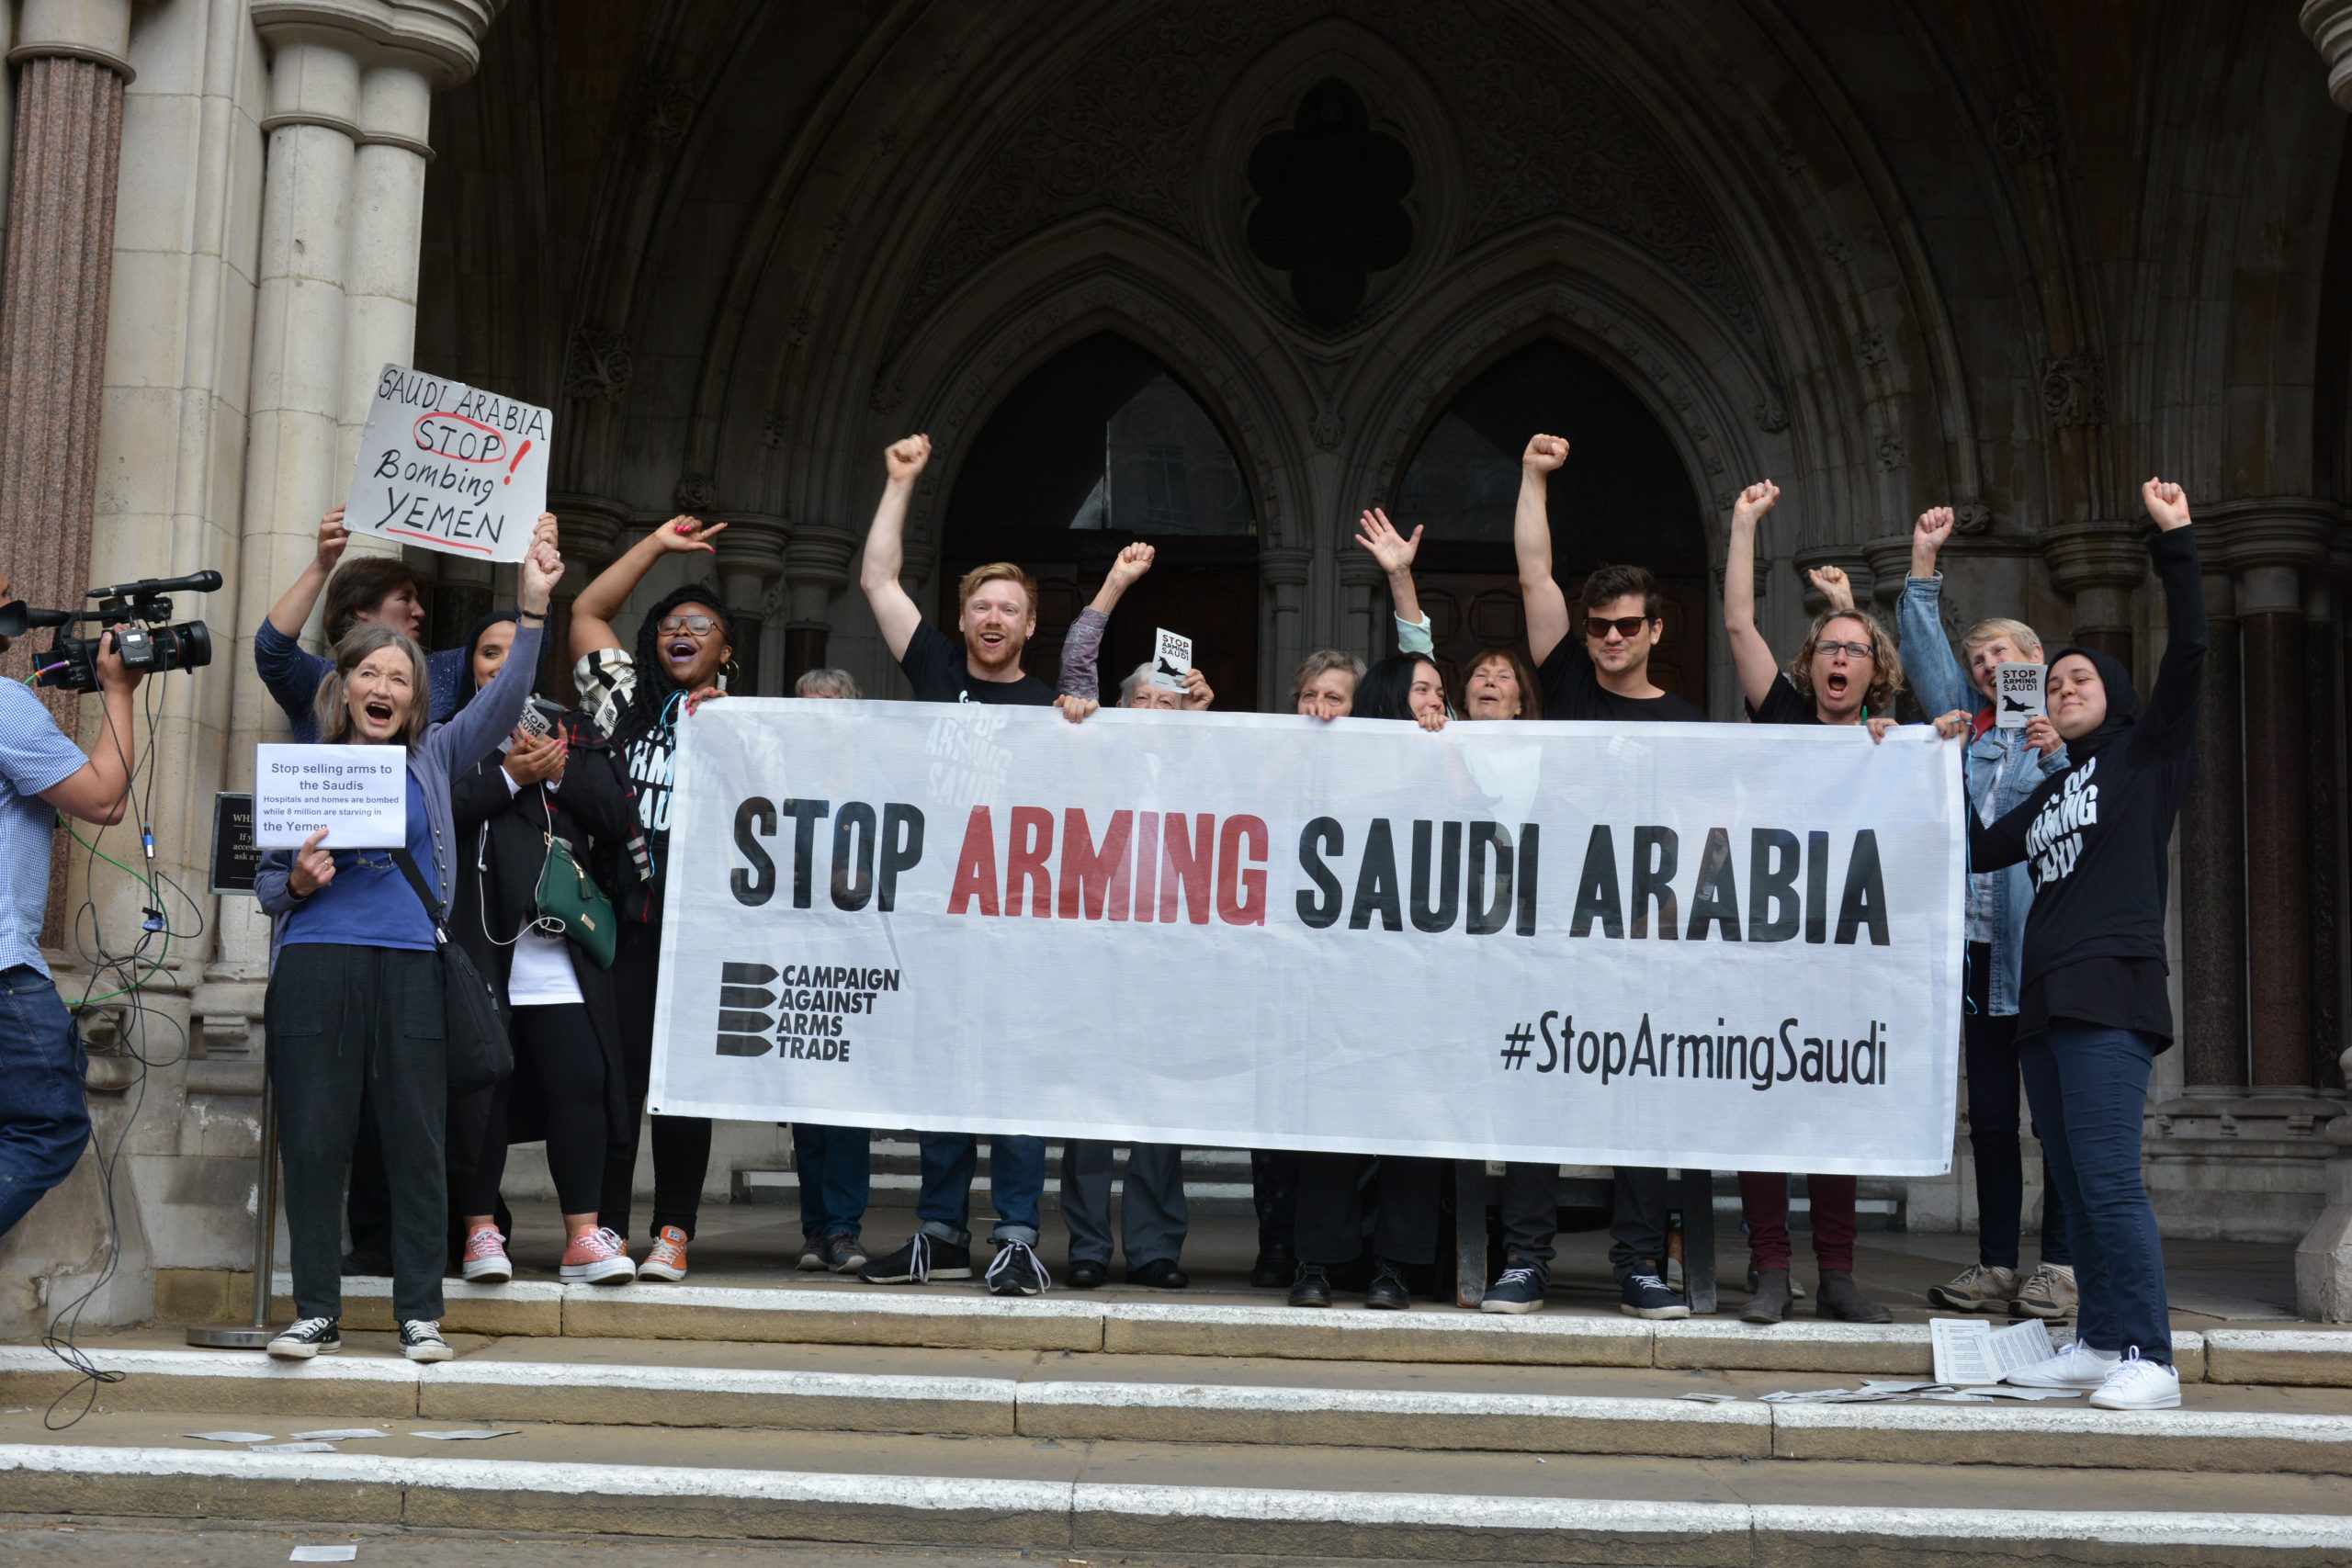 Campaigners with a Stop Arming Saudi banner outside the Royal Courts of Justice, another holds a sign saying Saudi Arabia Stop Bombing Yemen. They all appear happy and are raising their fists in the air.